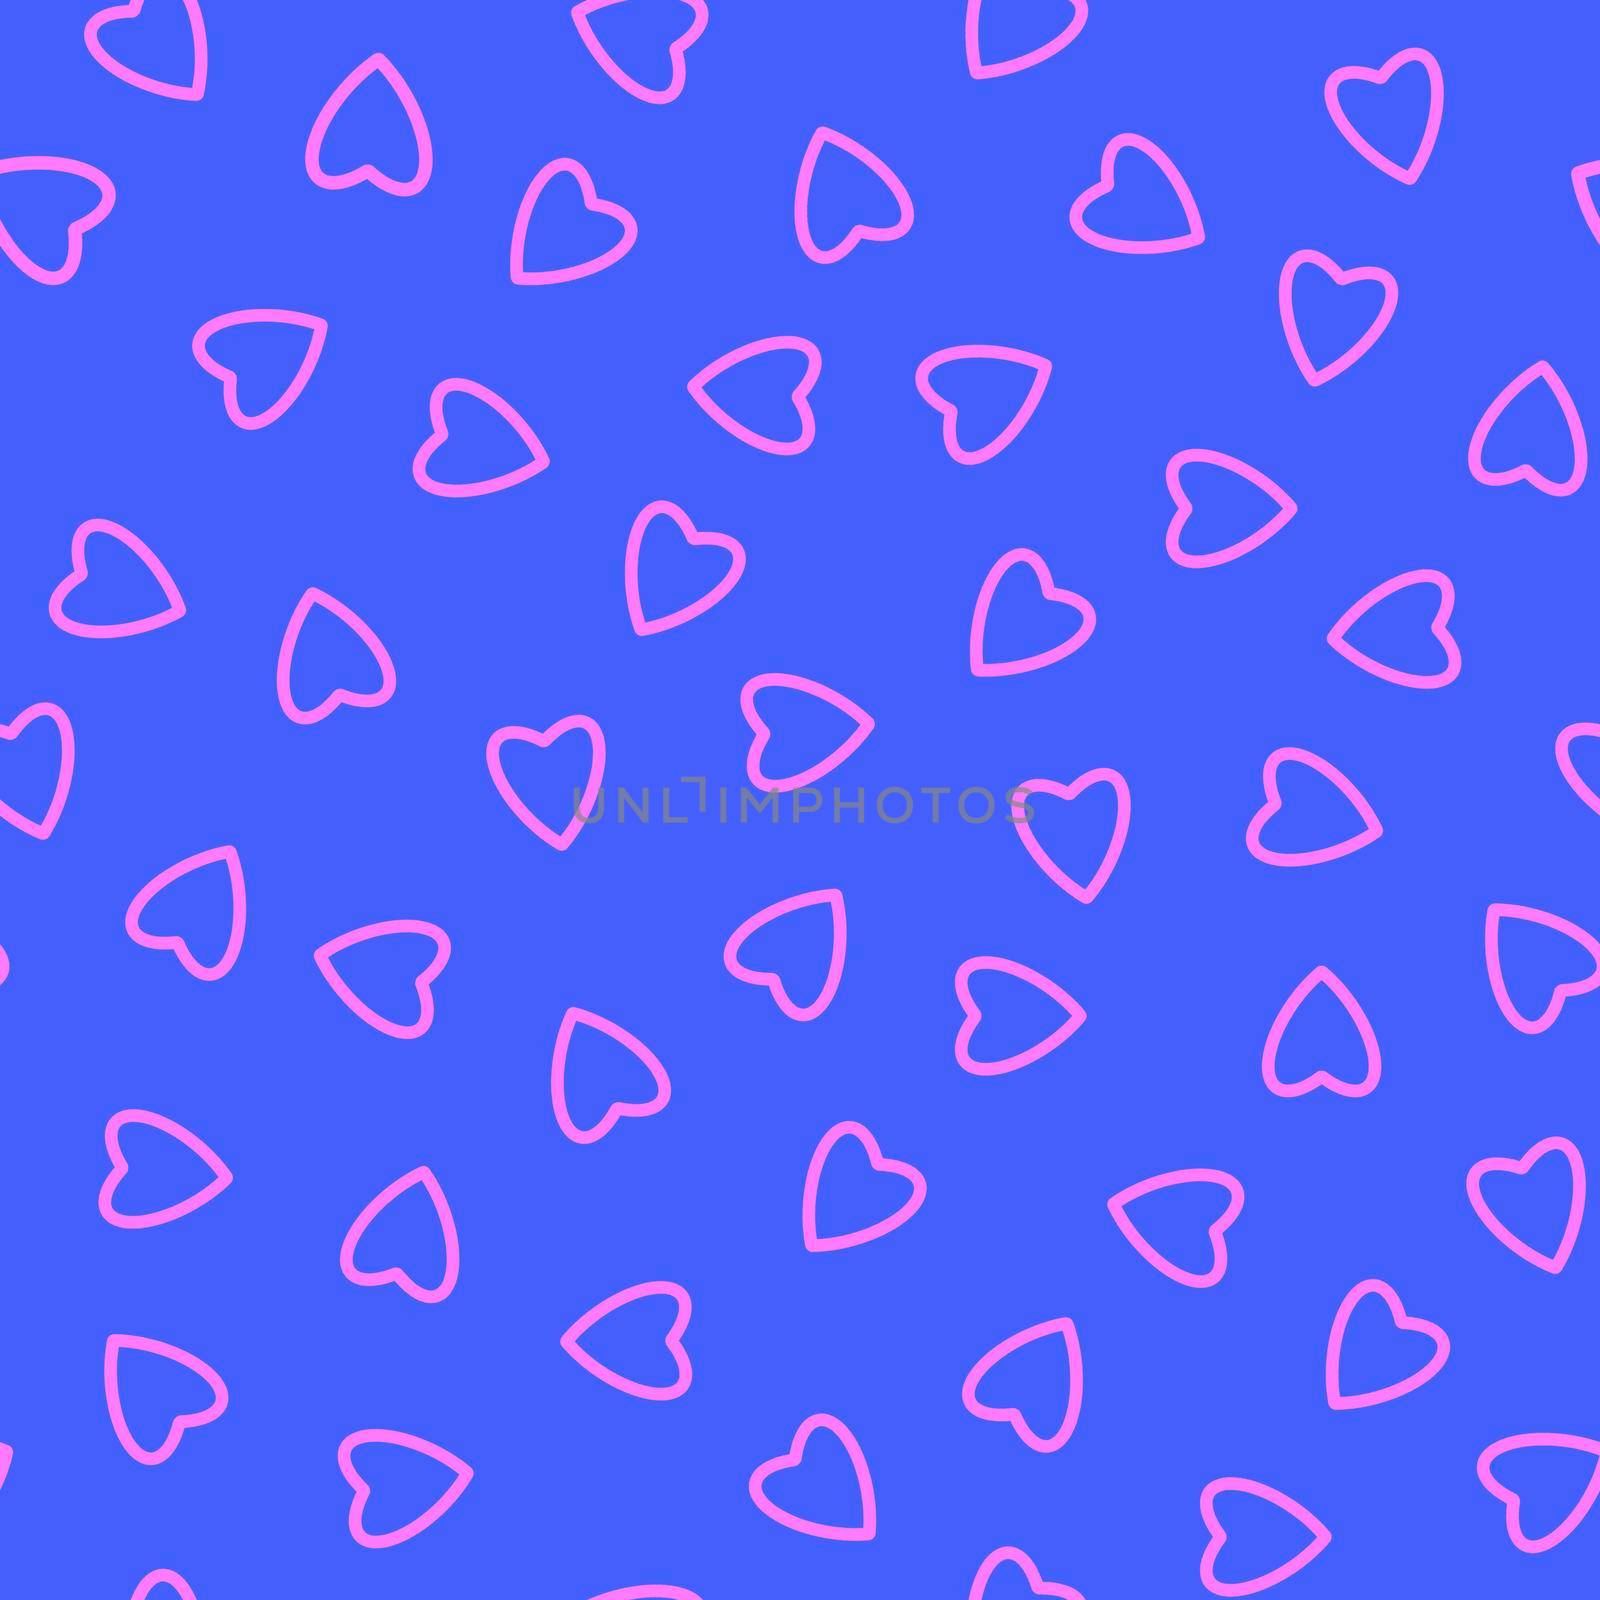 Simple hearts seamless pattern,endless chaotic texture made of tiny heart silhouettes.Valentines,mothers day background.Great for Easter,wedding,scrapbook,gift wrapping paper,textiles.Pink on blue by Angelsmoon